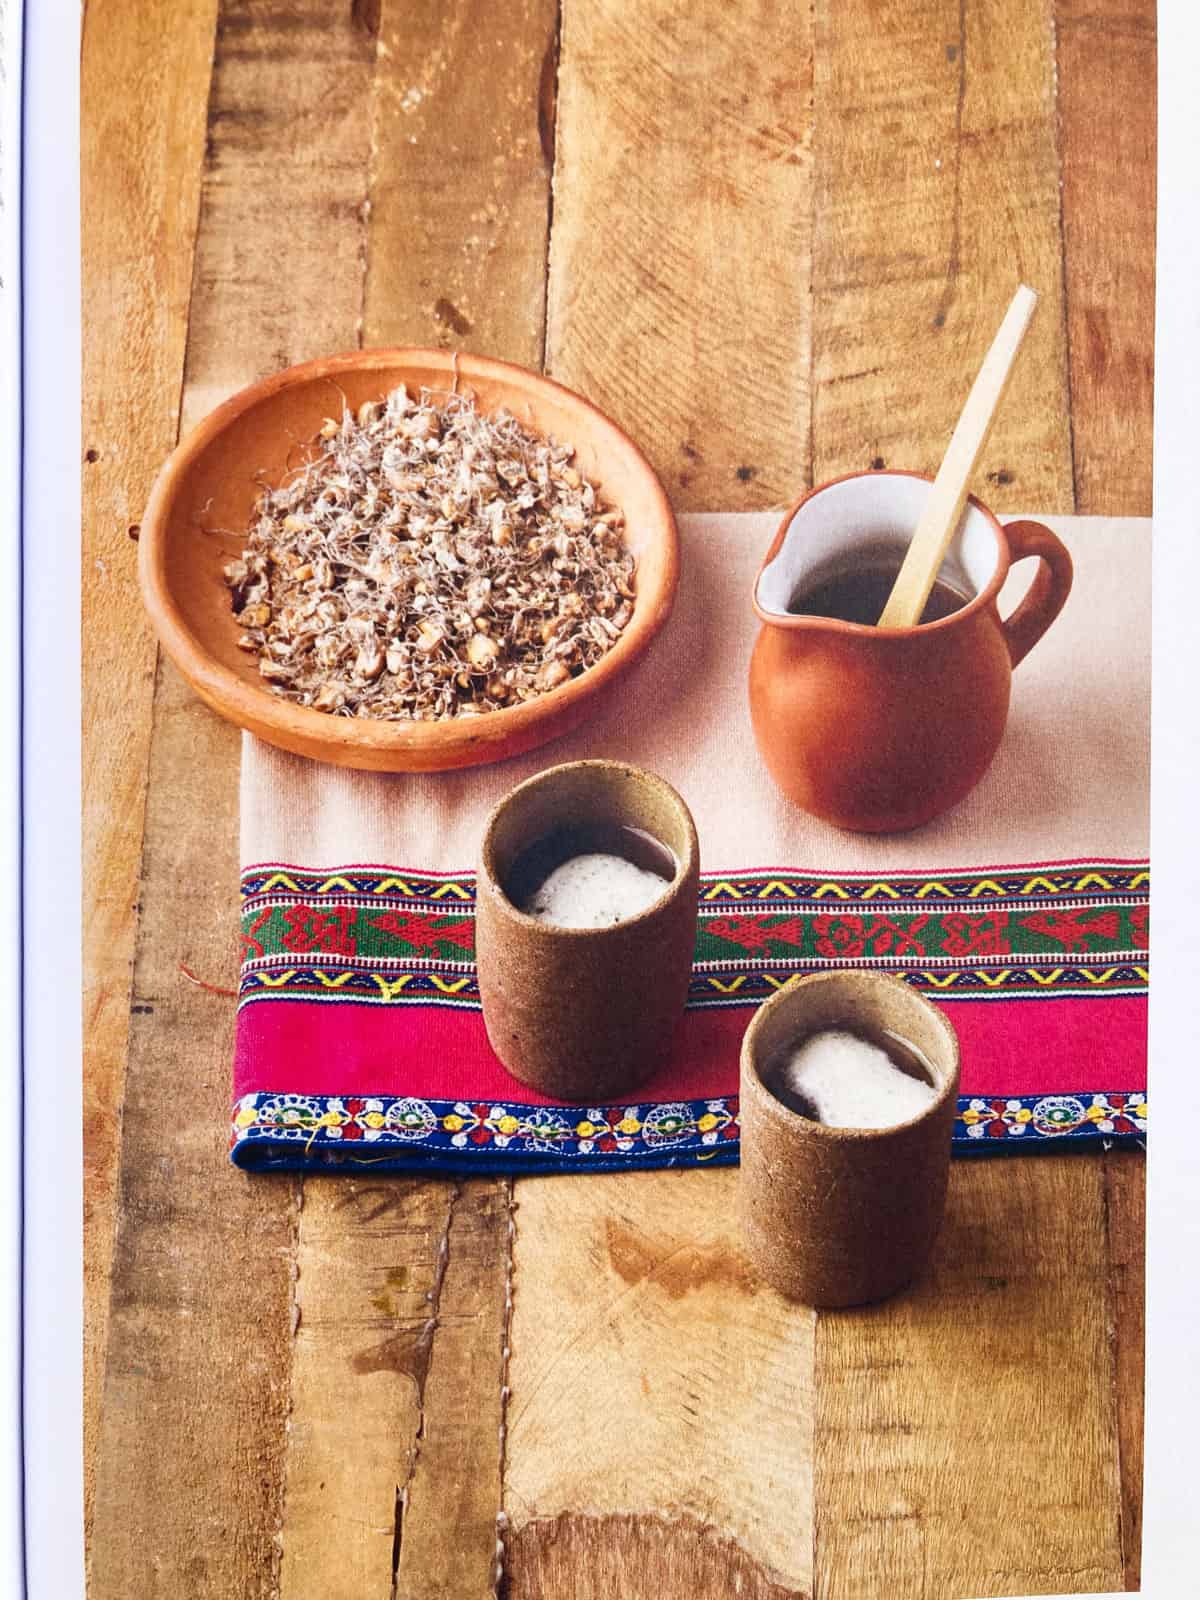 image of corn beer in The Latin American Cookbook. Original image by Jimena Agois